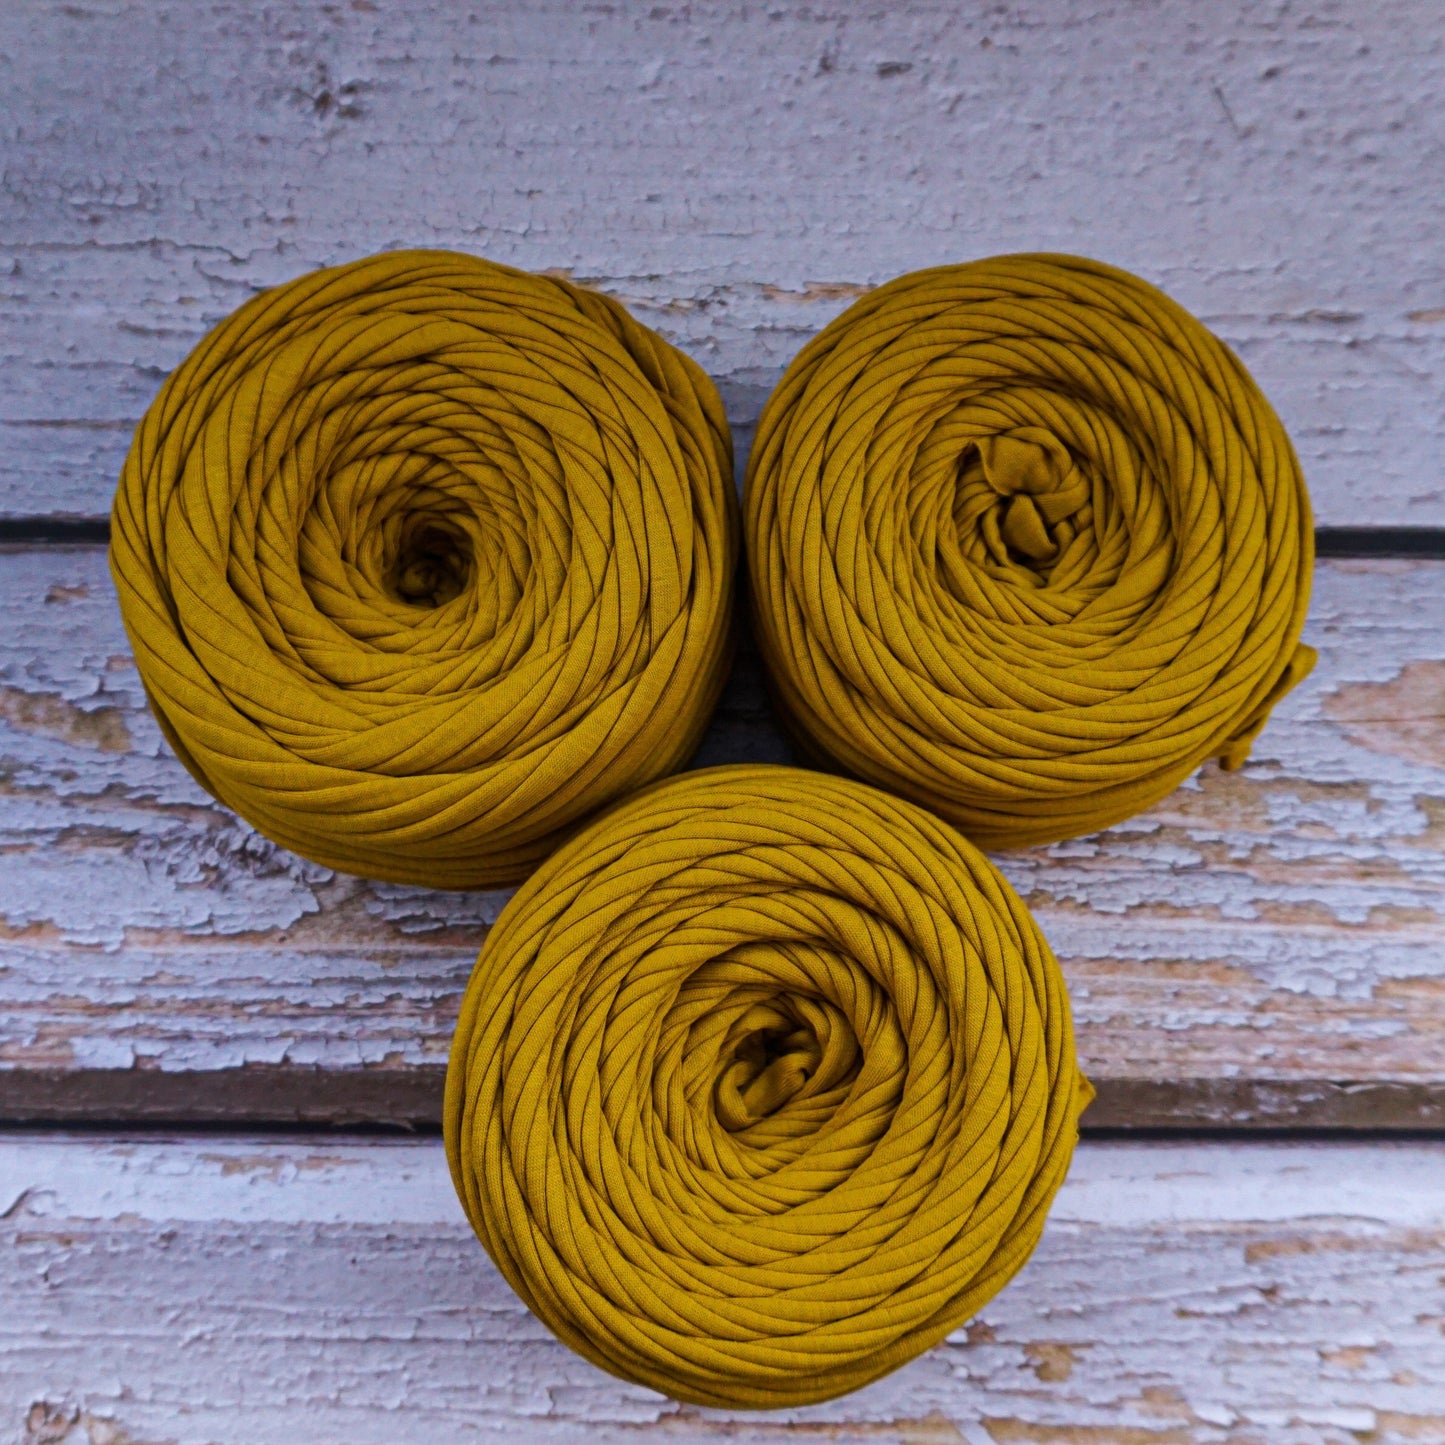 T-shirt yarn for crocheting baskets, bags, rugs and home decor. Honey color